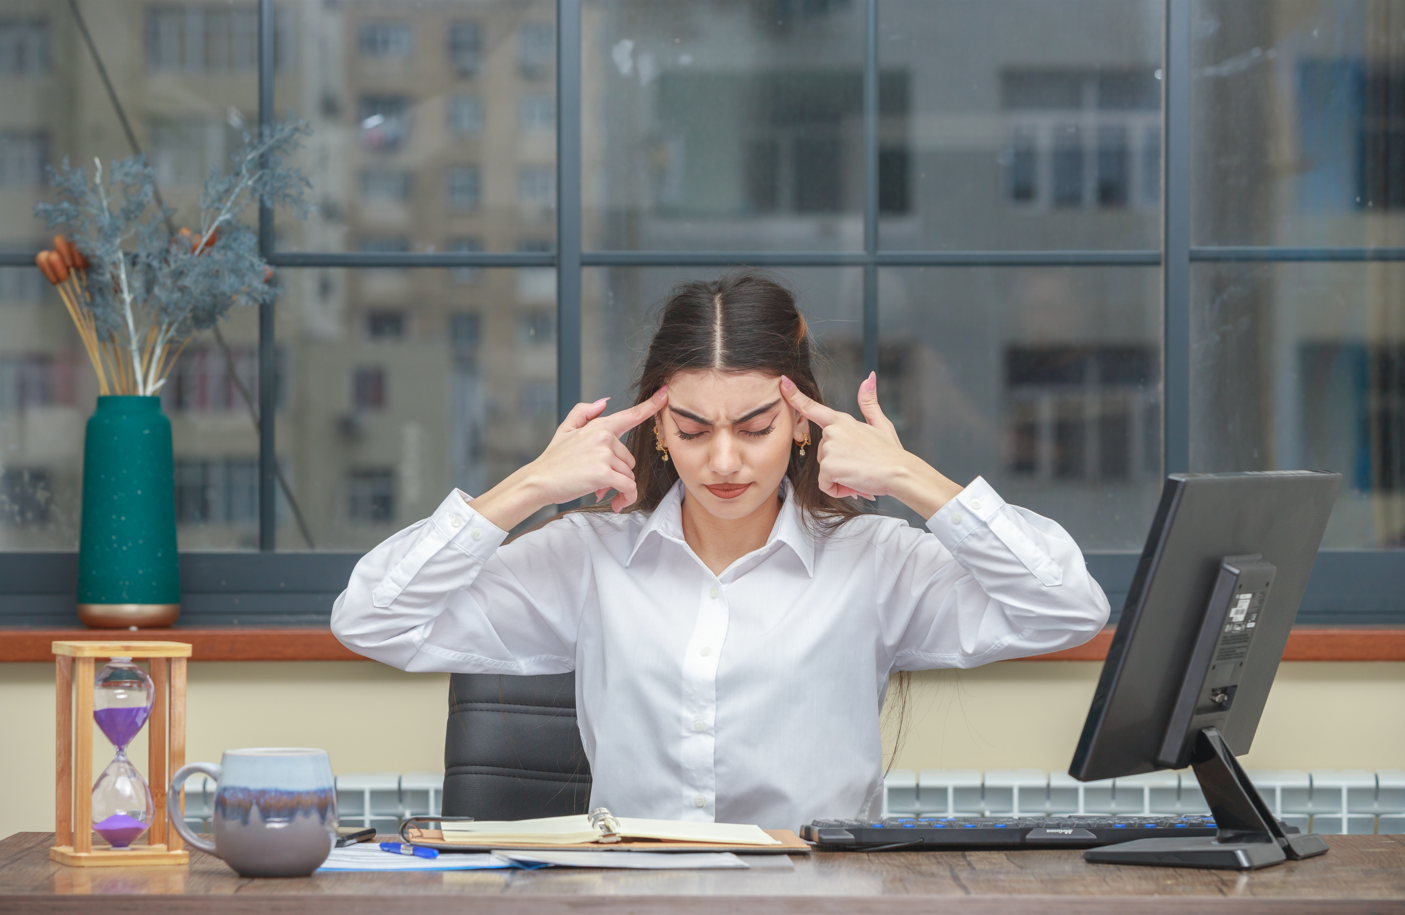 What remedies can a doctor prescribe to alleviate the effects of stress caused by work?